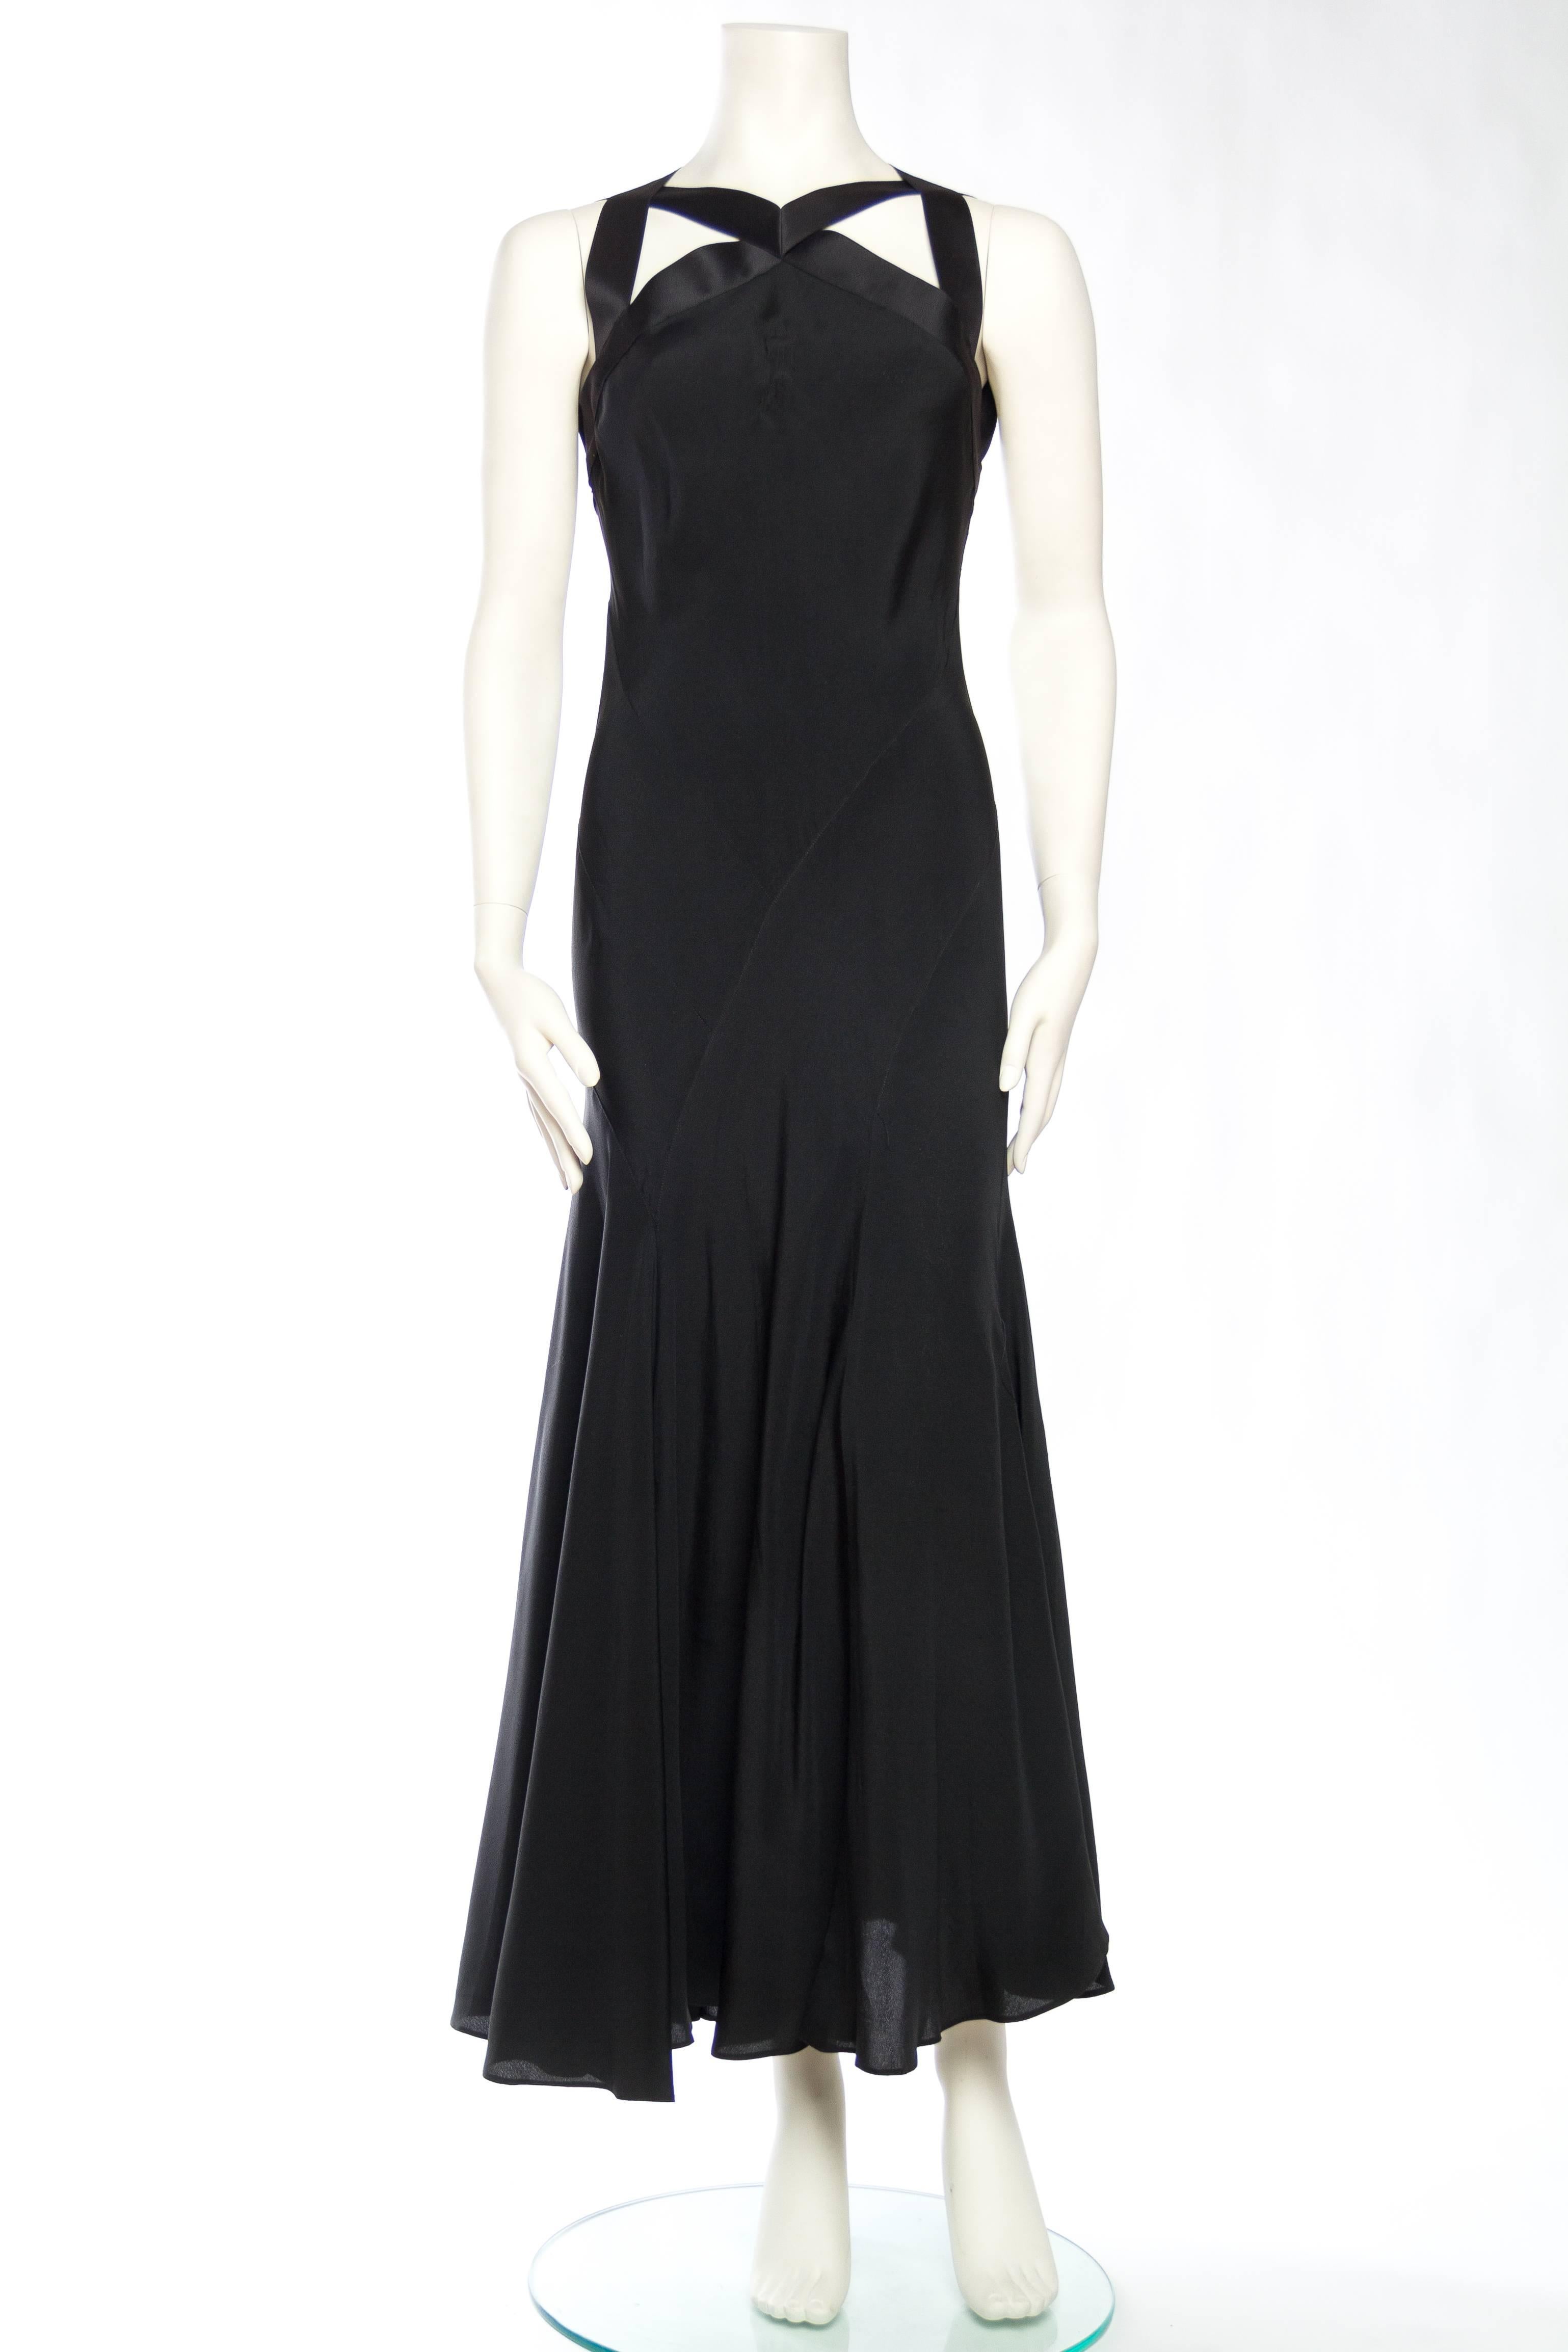 Black 1930s Art-Deco Seamed Bias-Cut Gown with Ribbon Detailed Cut-outs